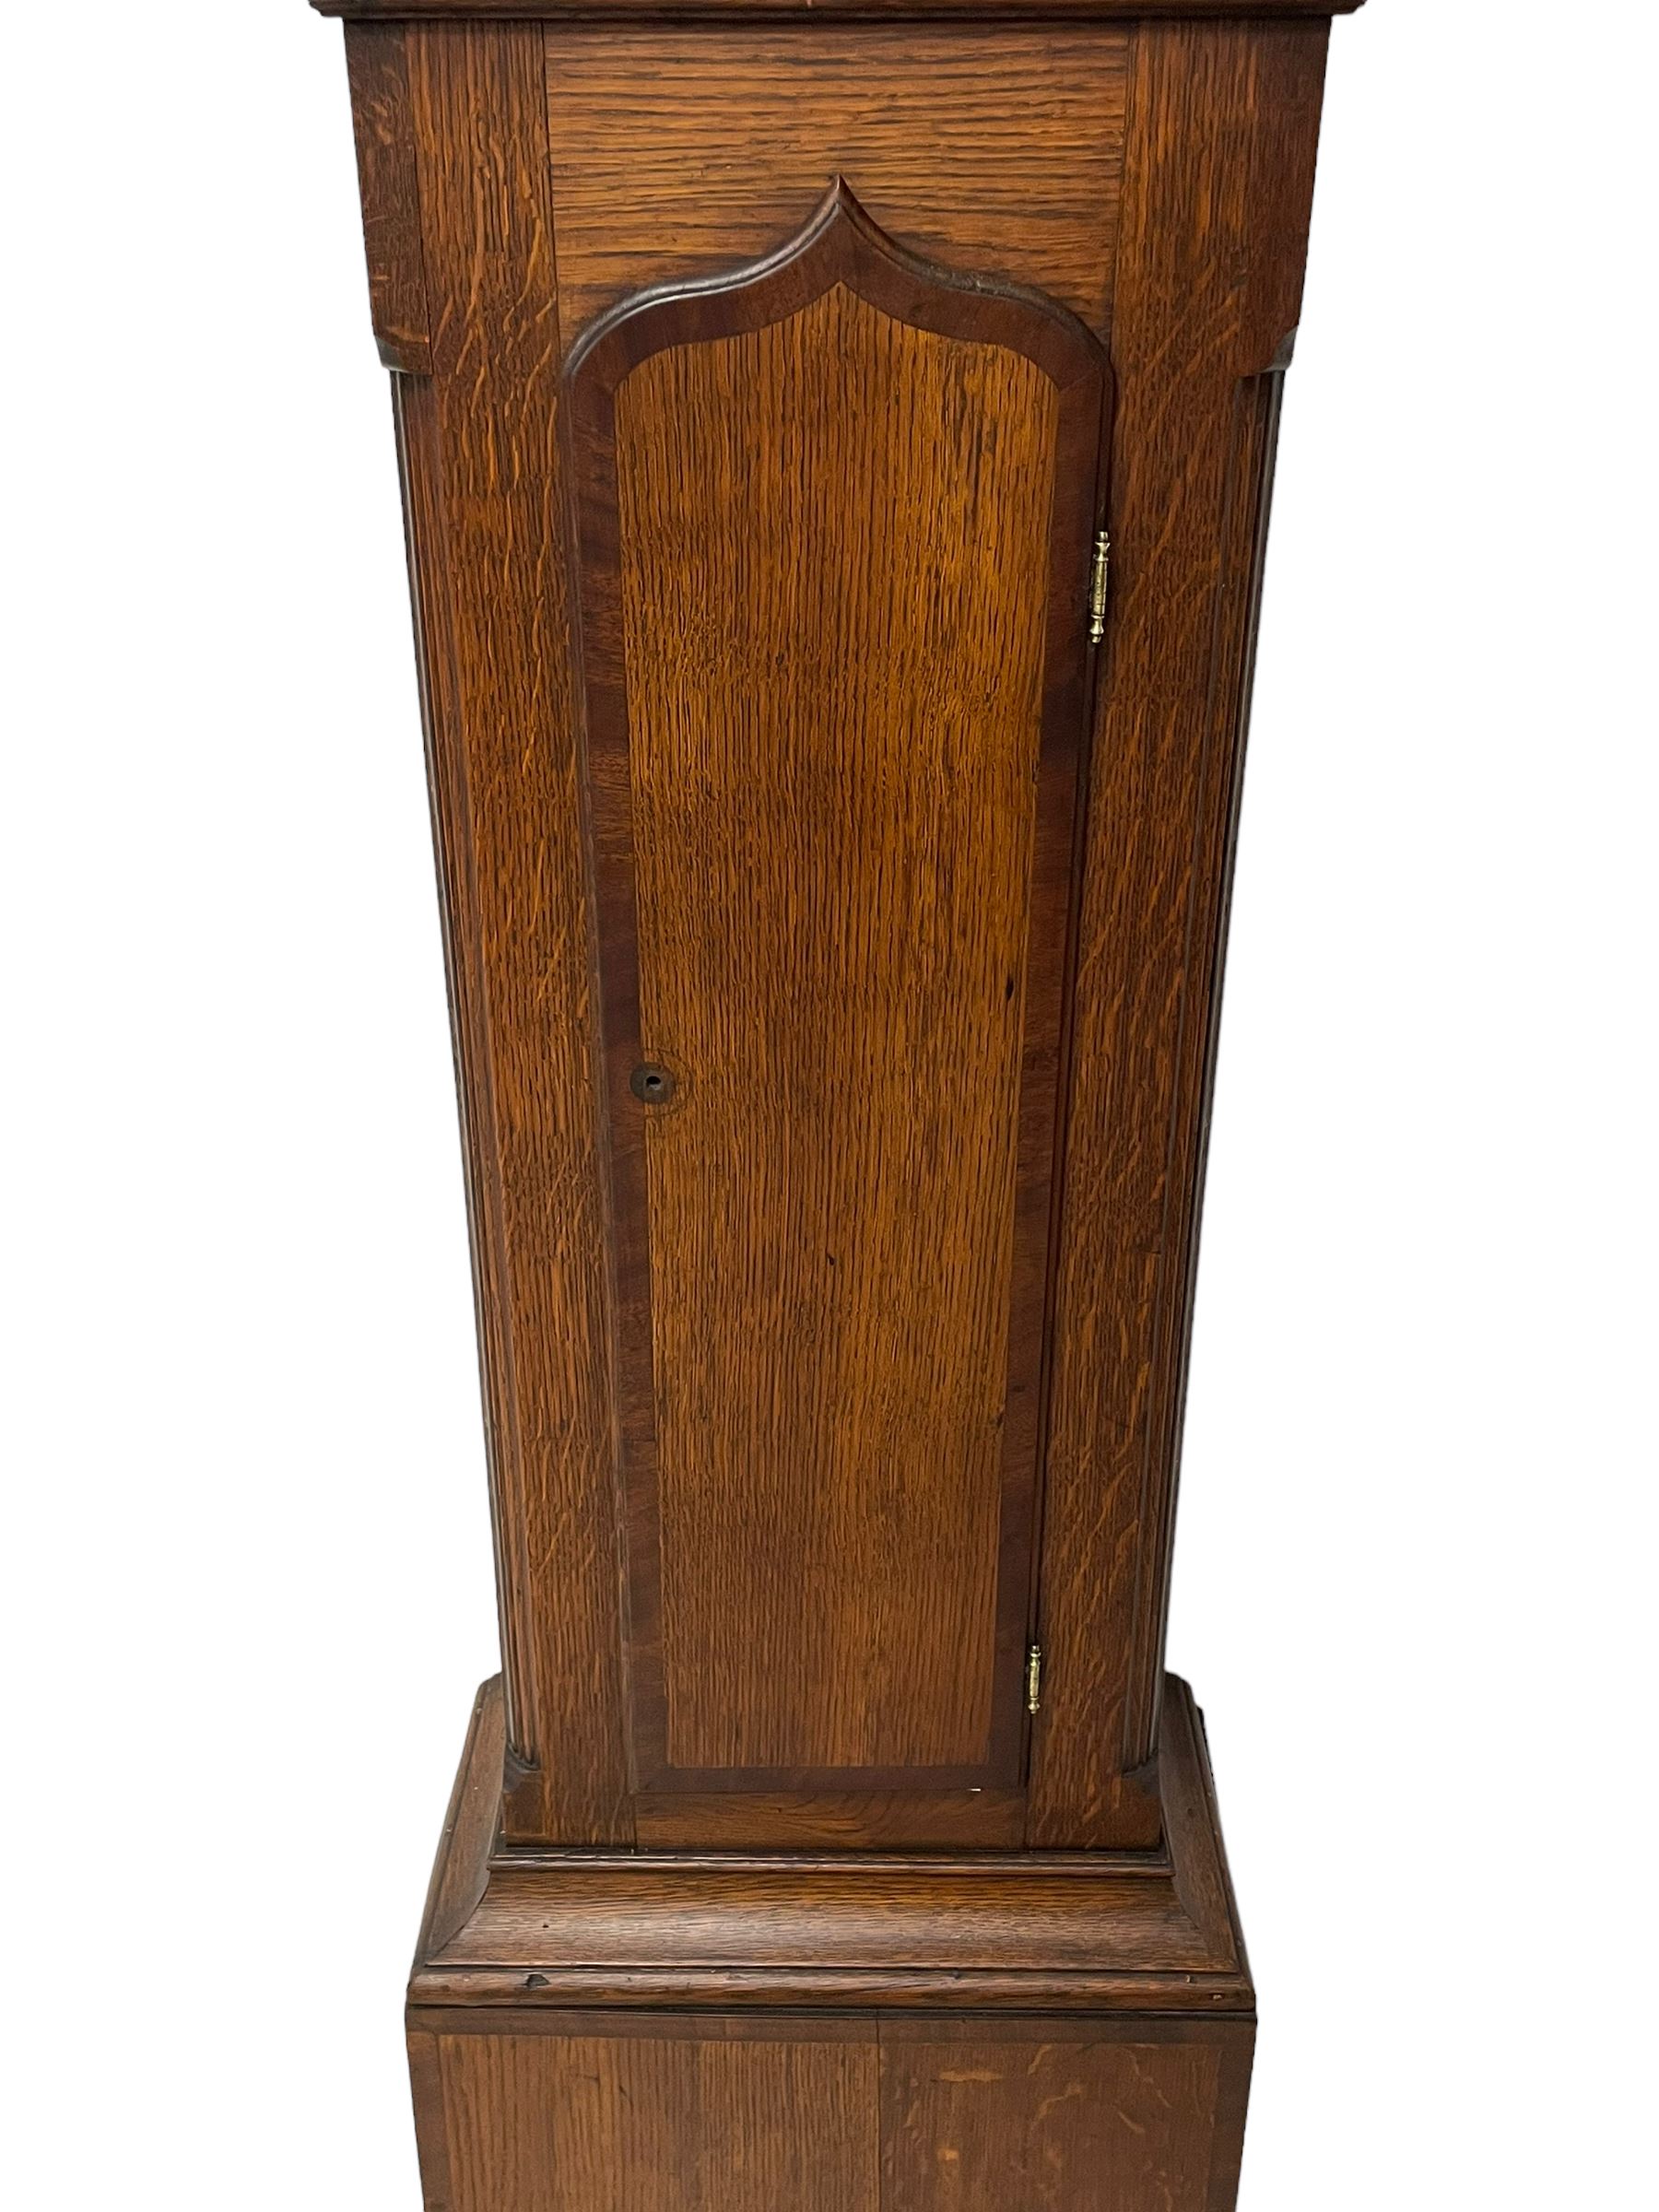 John Greaves of Newcastle - Mid-18th century 8-day oak longcase clock with a flat top - Image 3 of 12